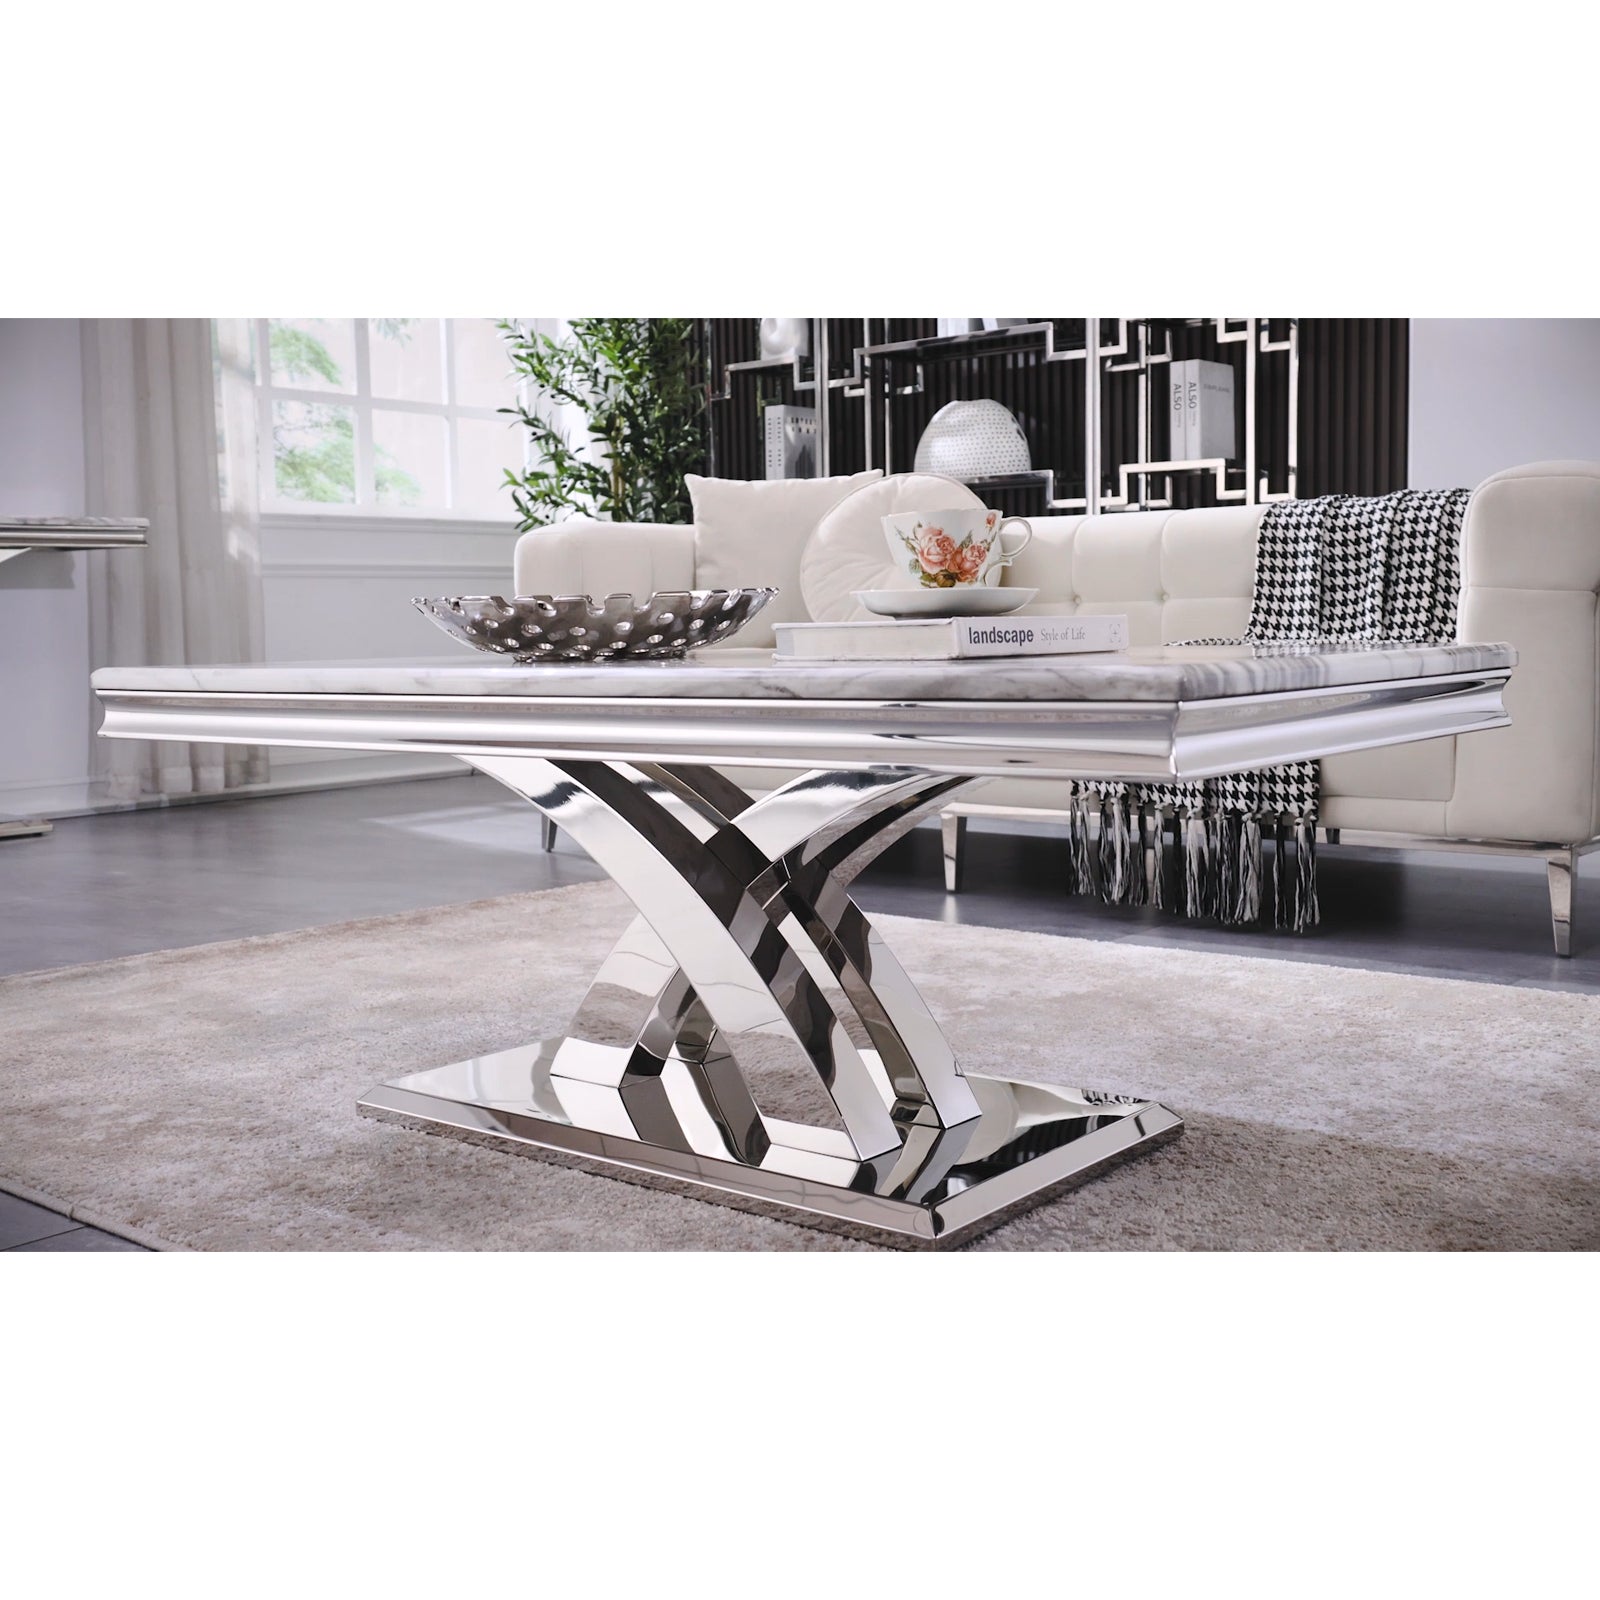 AUZ Coffee Table: A Reflection of Style and Sophistication